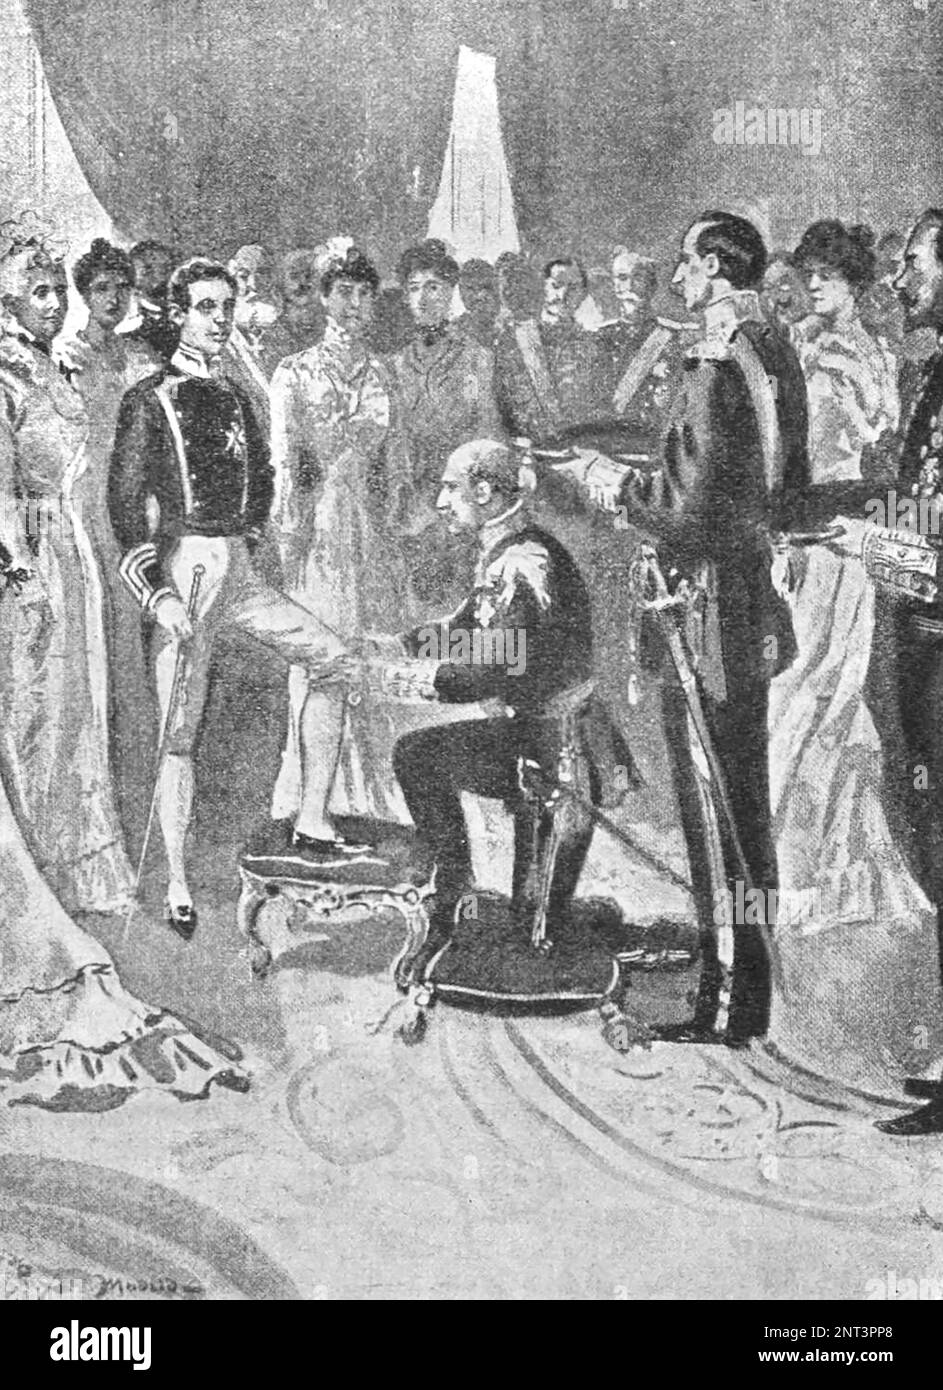 Accession of King Alfonso XIII to the throne. Solemn ceremony of receiving King Alfonso XIII of the most senior English Order of the Garter. Illustration from 1902. Stock Photo